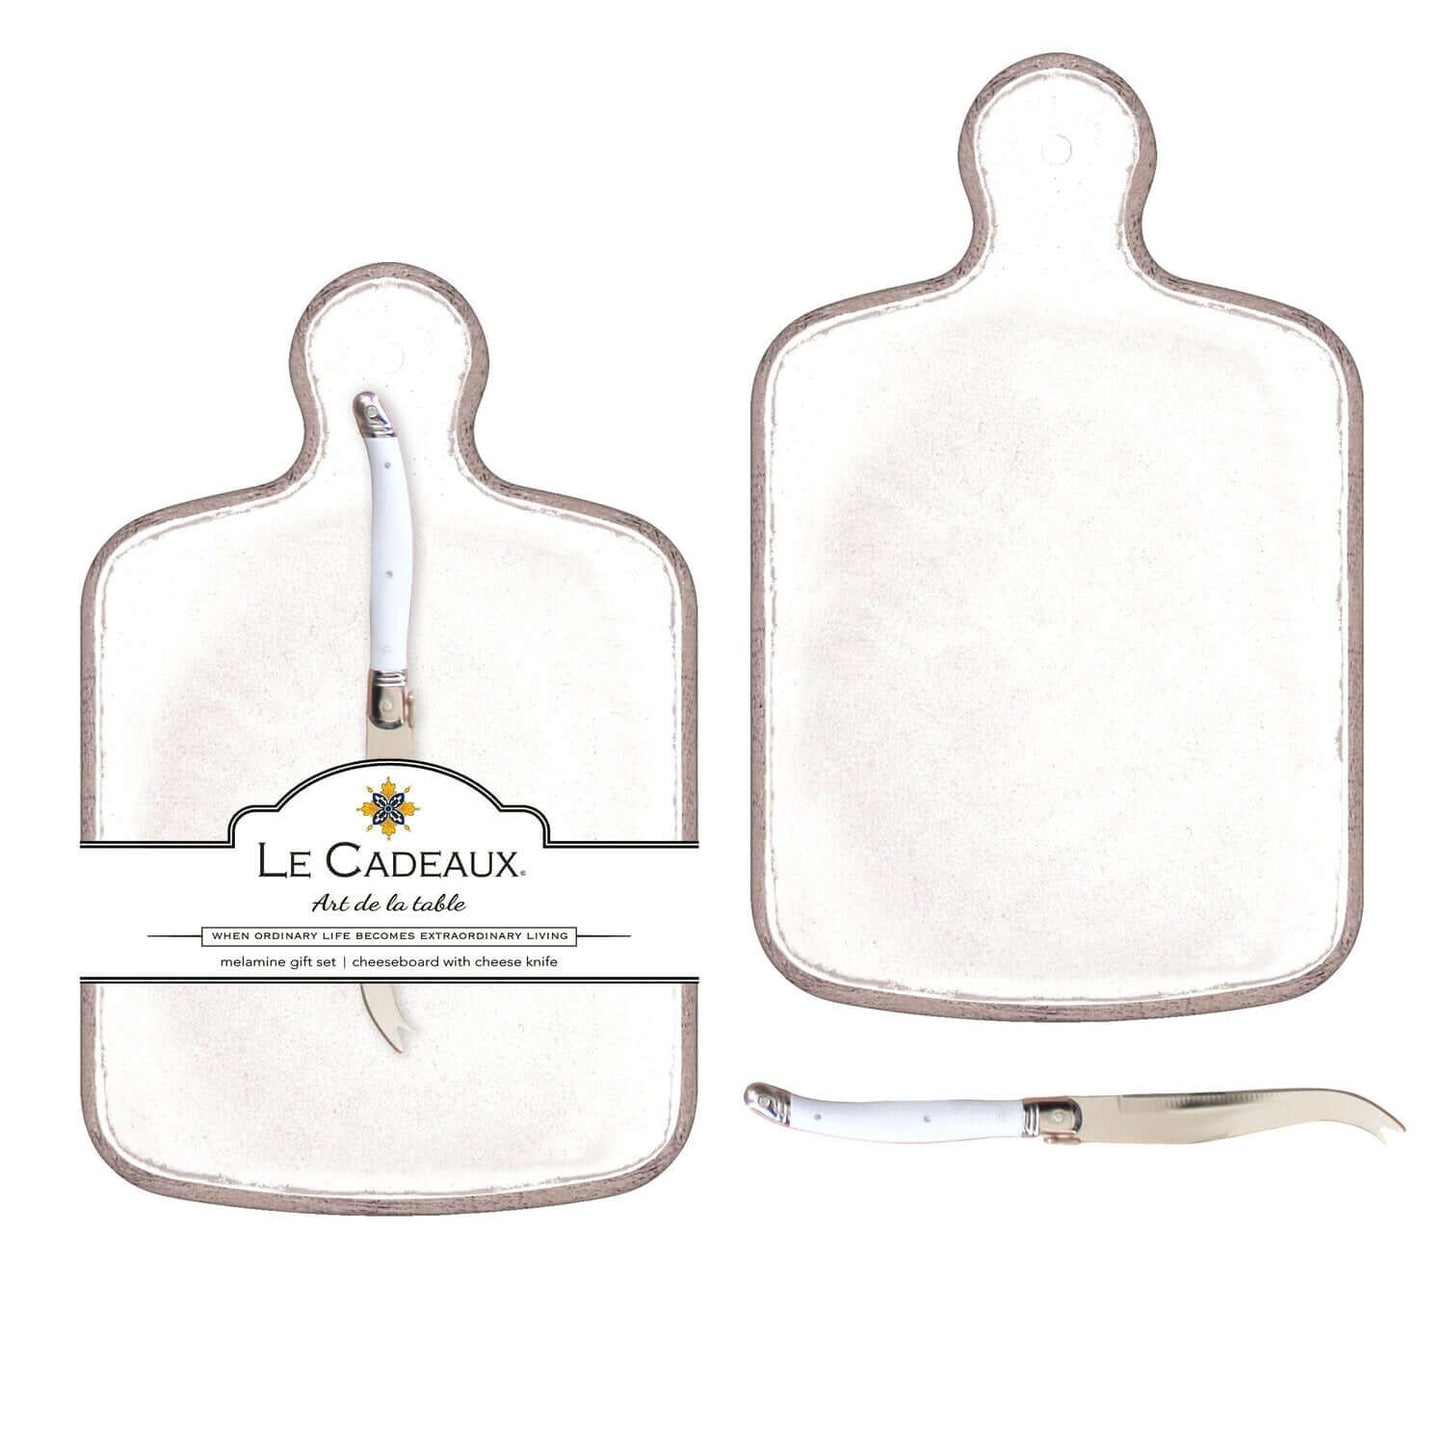 Rustica Antique White Cheeseboard Gift Set - Royalties